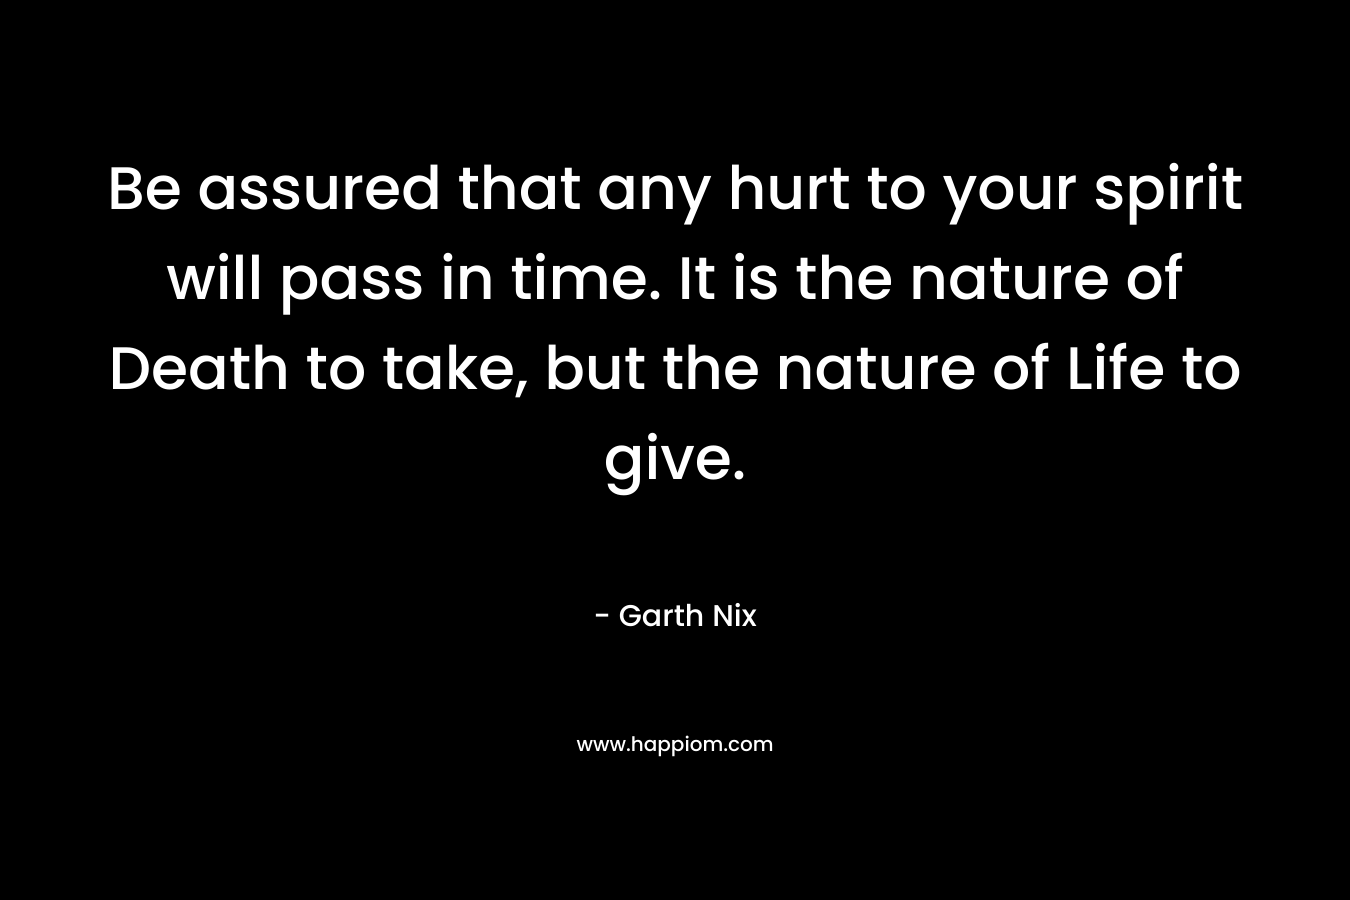 Be assured that any hurt to your spirit will pass in time. It is the nature of Death to take, but the nature of Life to give. – Garth Nix